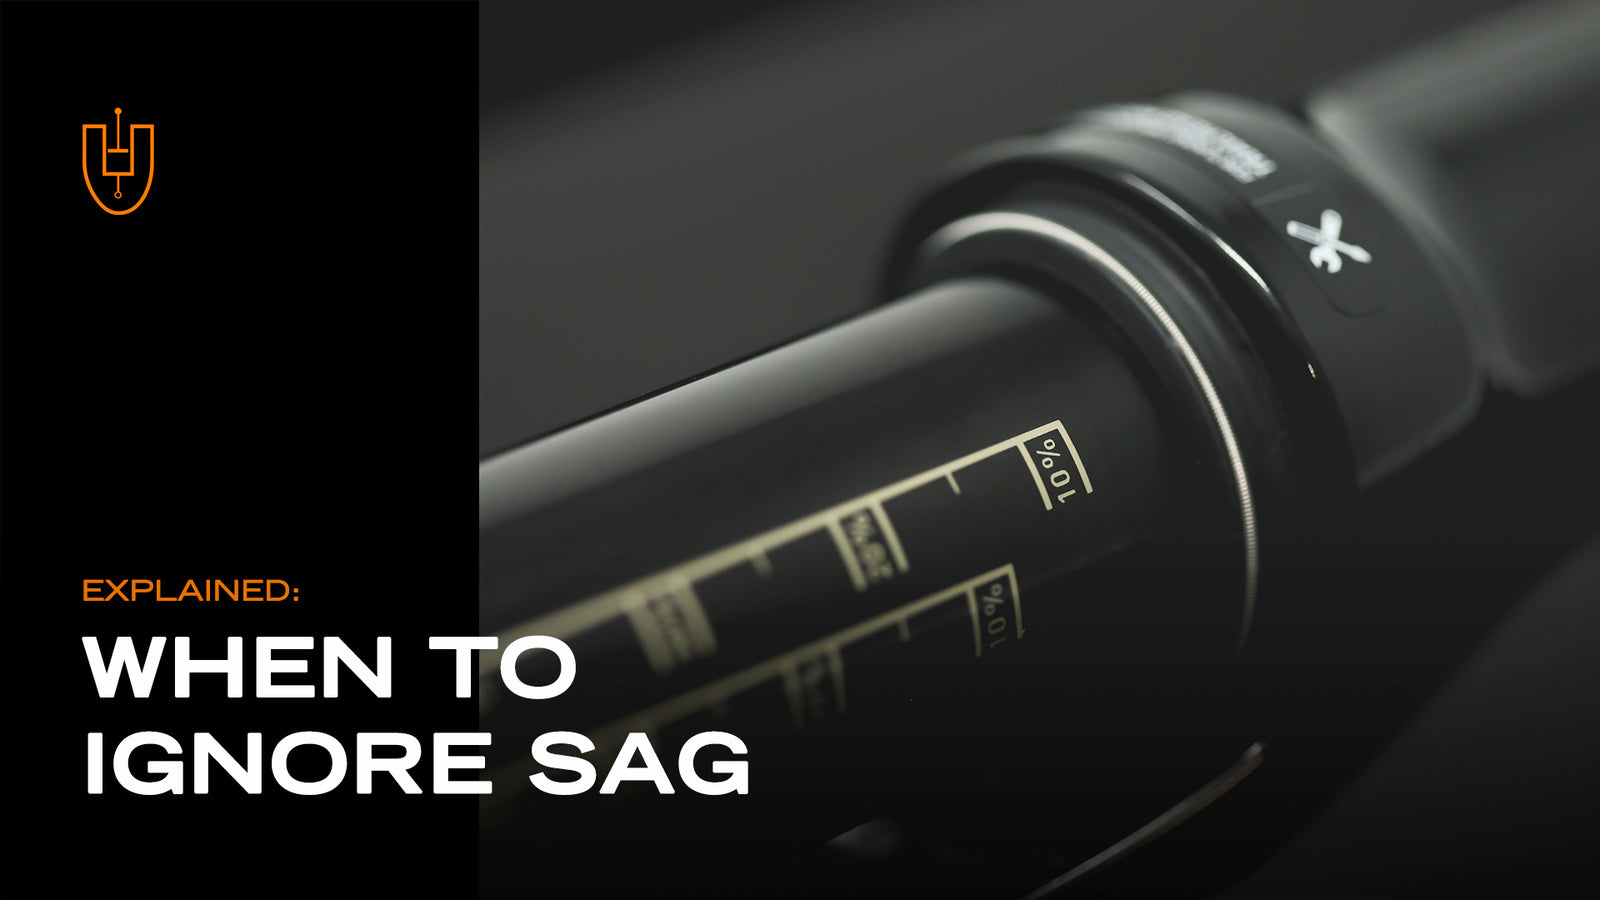 When to Ignore Sag